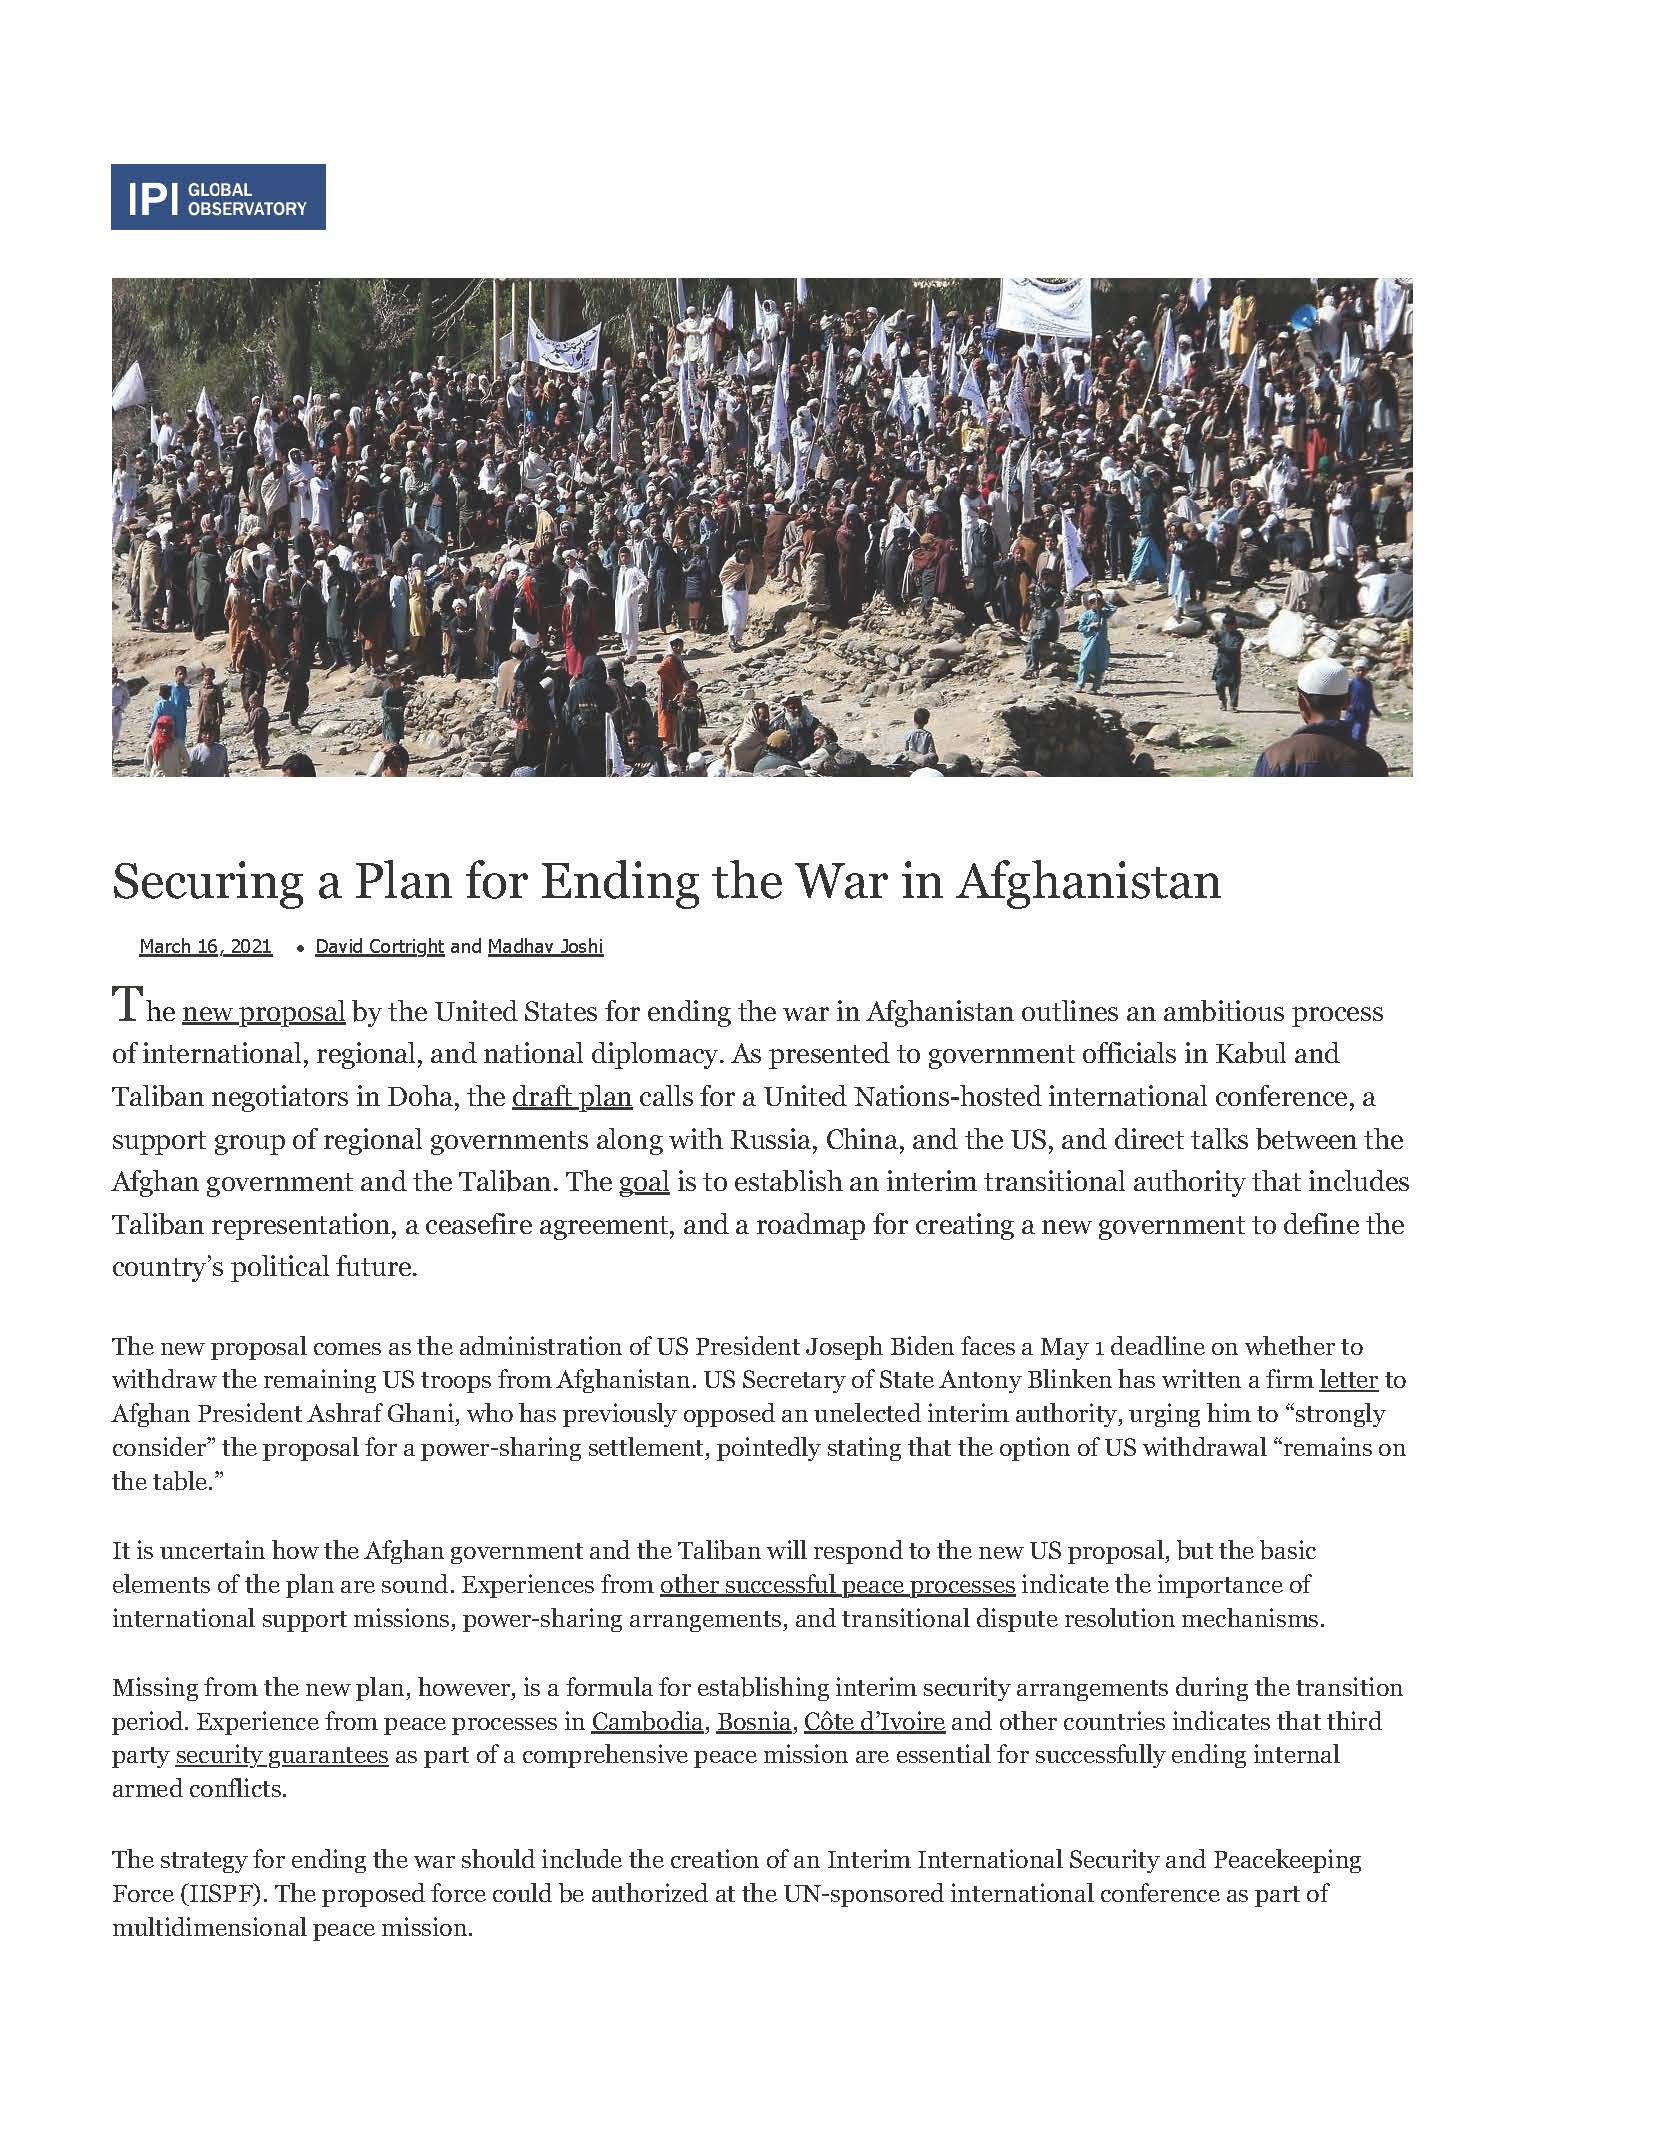 Securing a Plan for Ending the War in Afghanistan